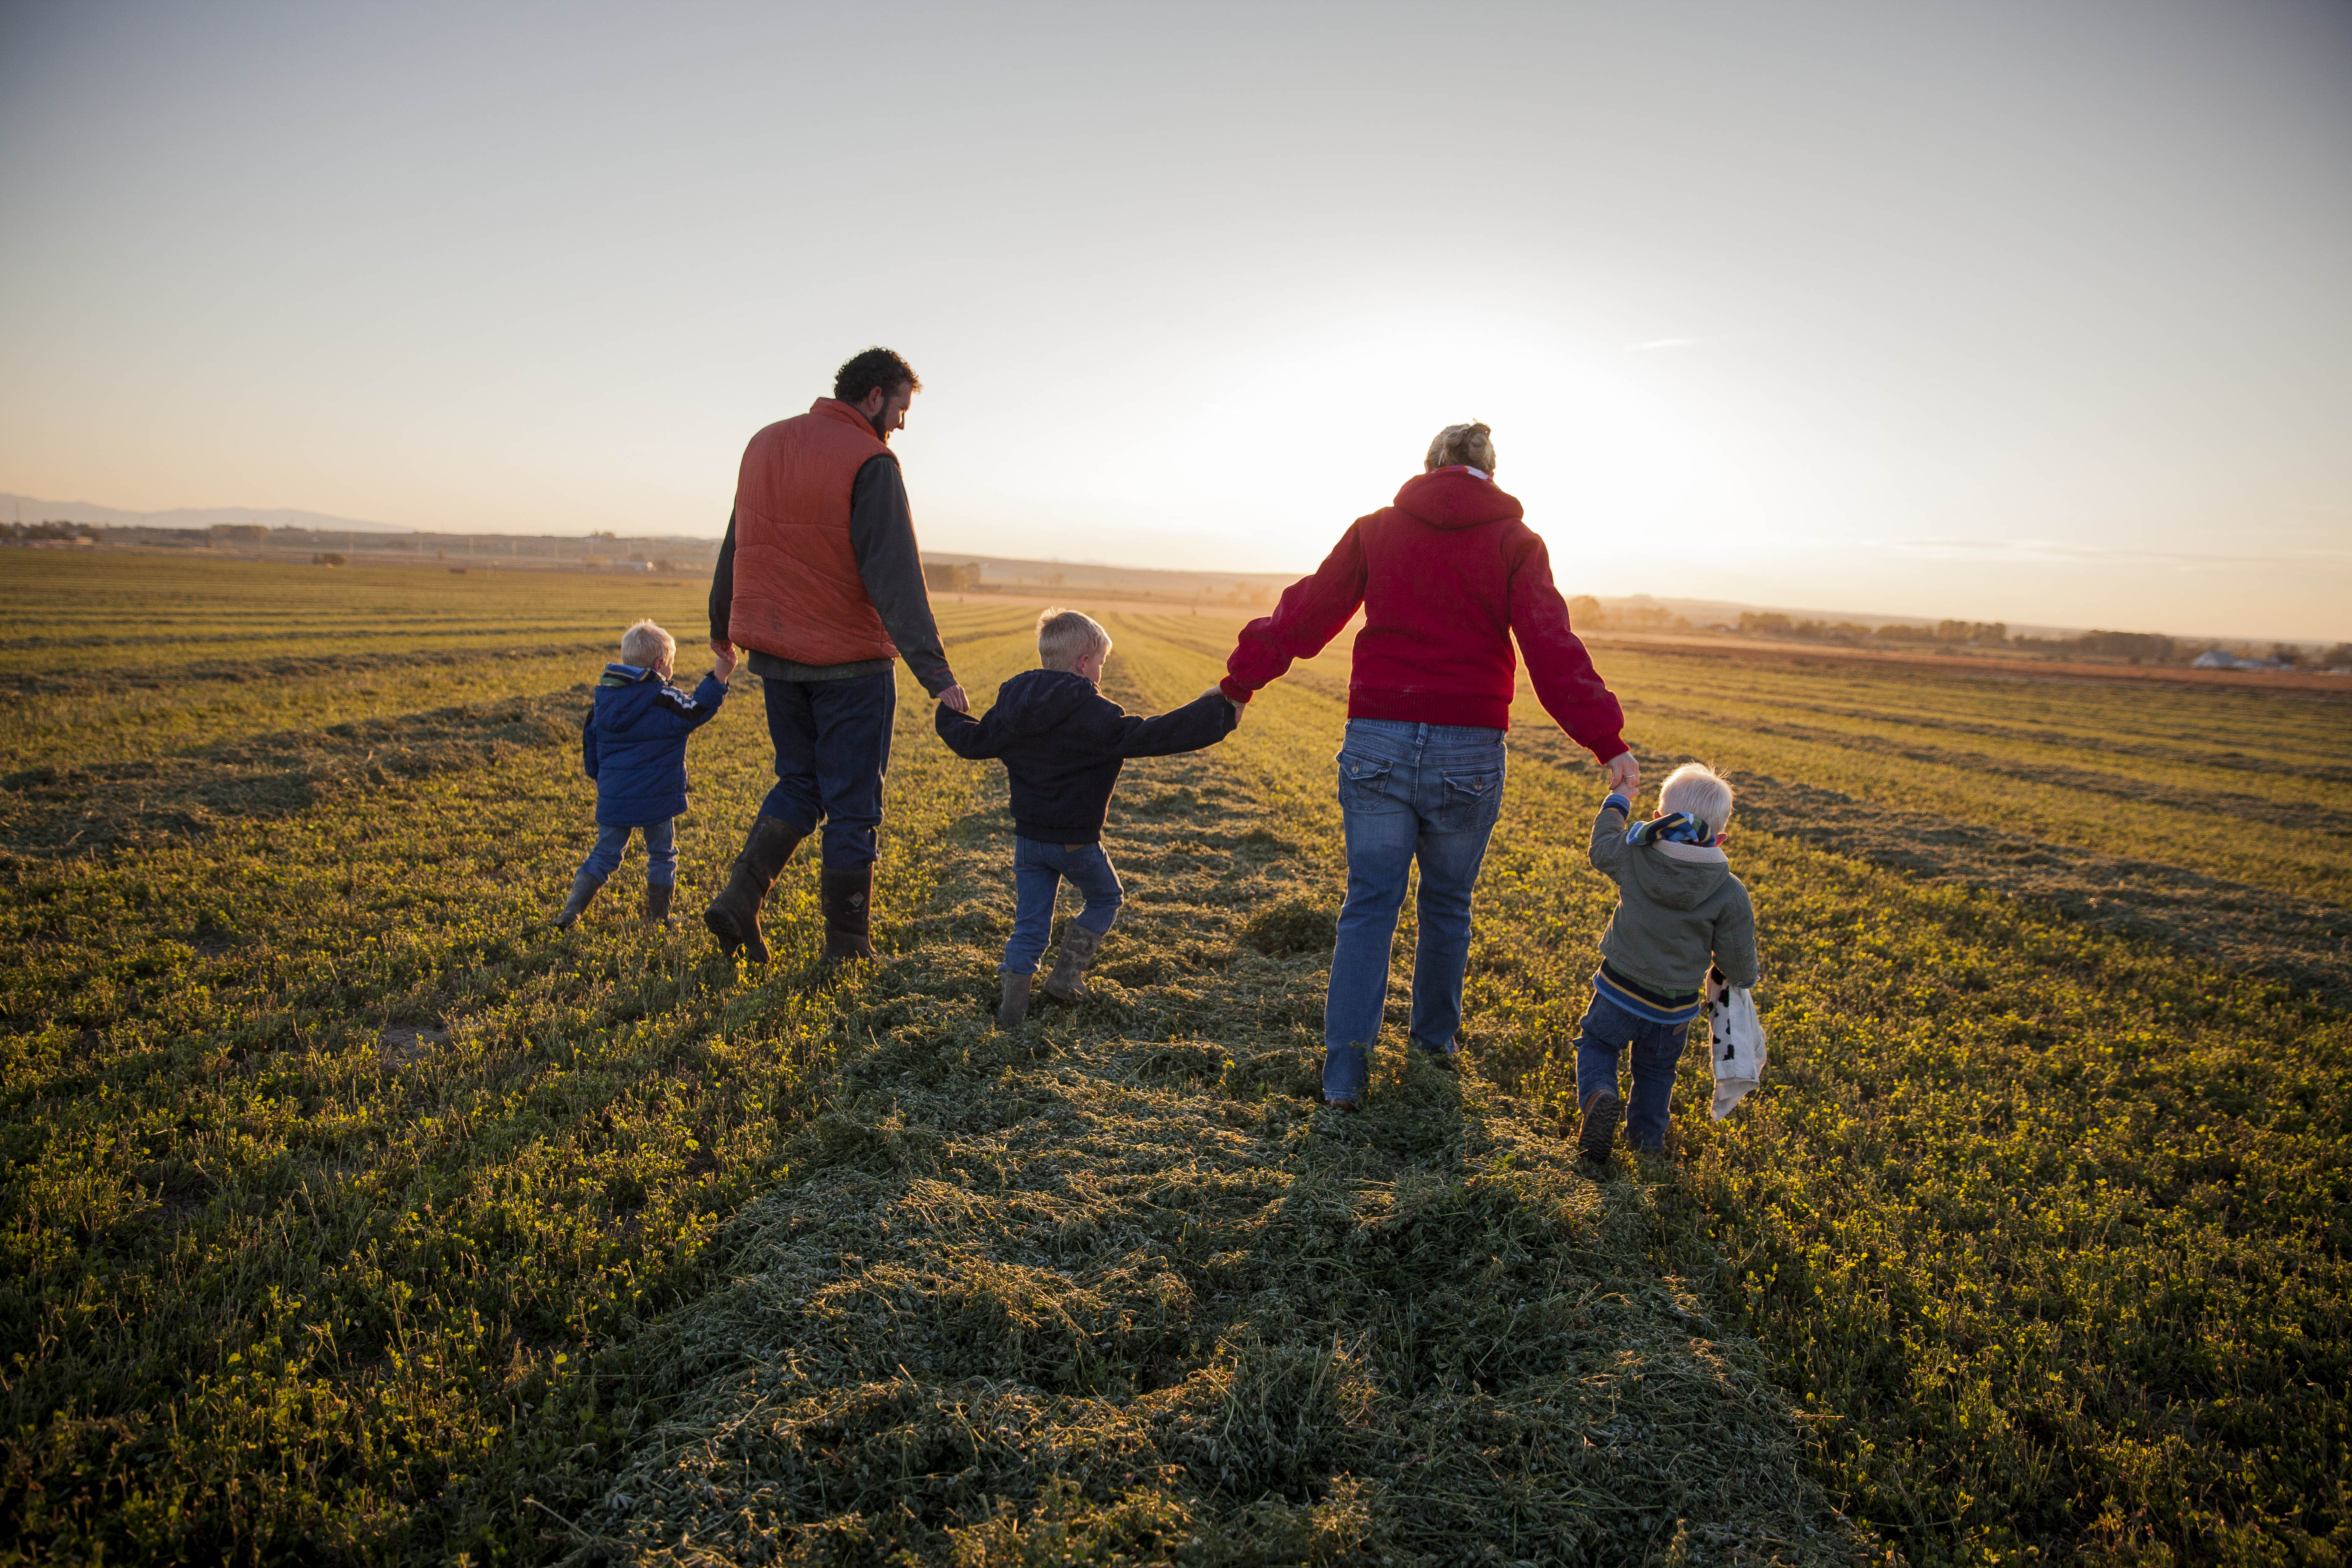 NFU Celebrates National Agriculture Day — Recognizes Family Farmers’ Full Breadth of Contributions to Everyday Life